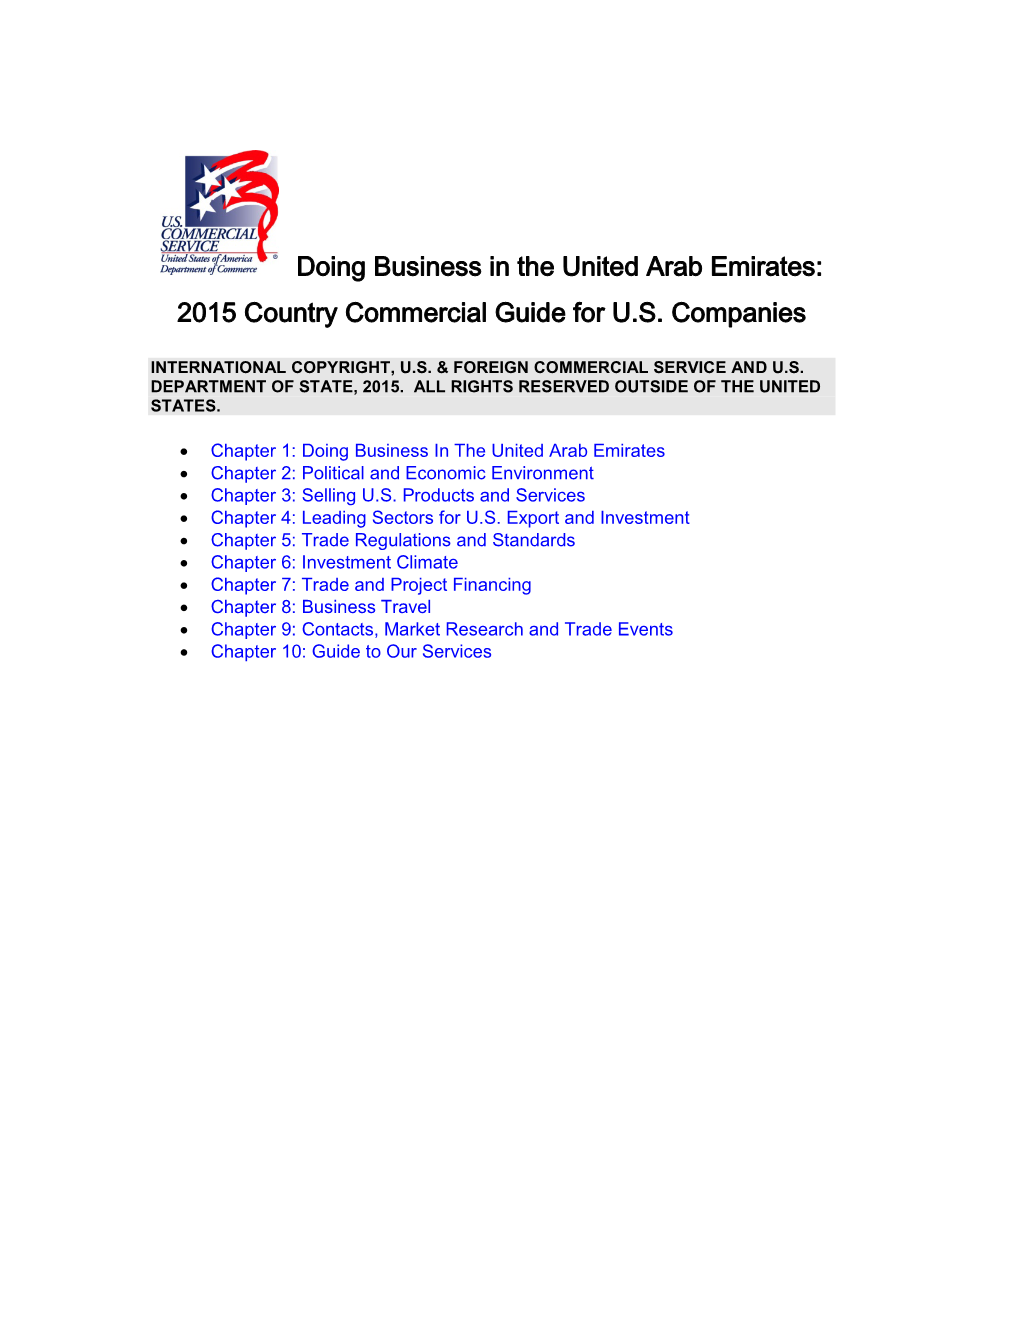 Doing Business in the United Arab Emirates: 2015 Country Commercial Guide for U.S